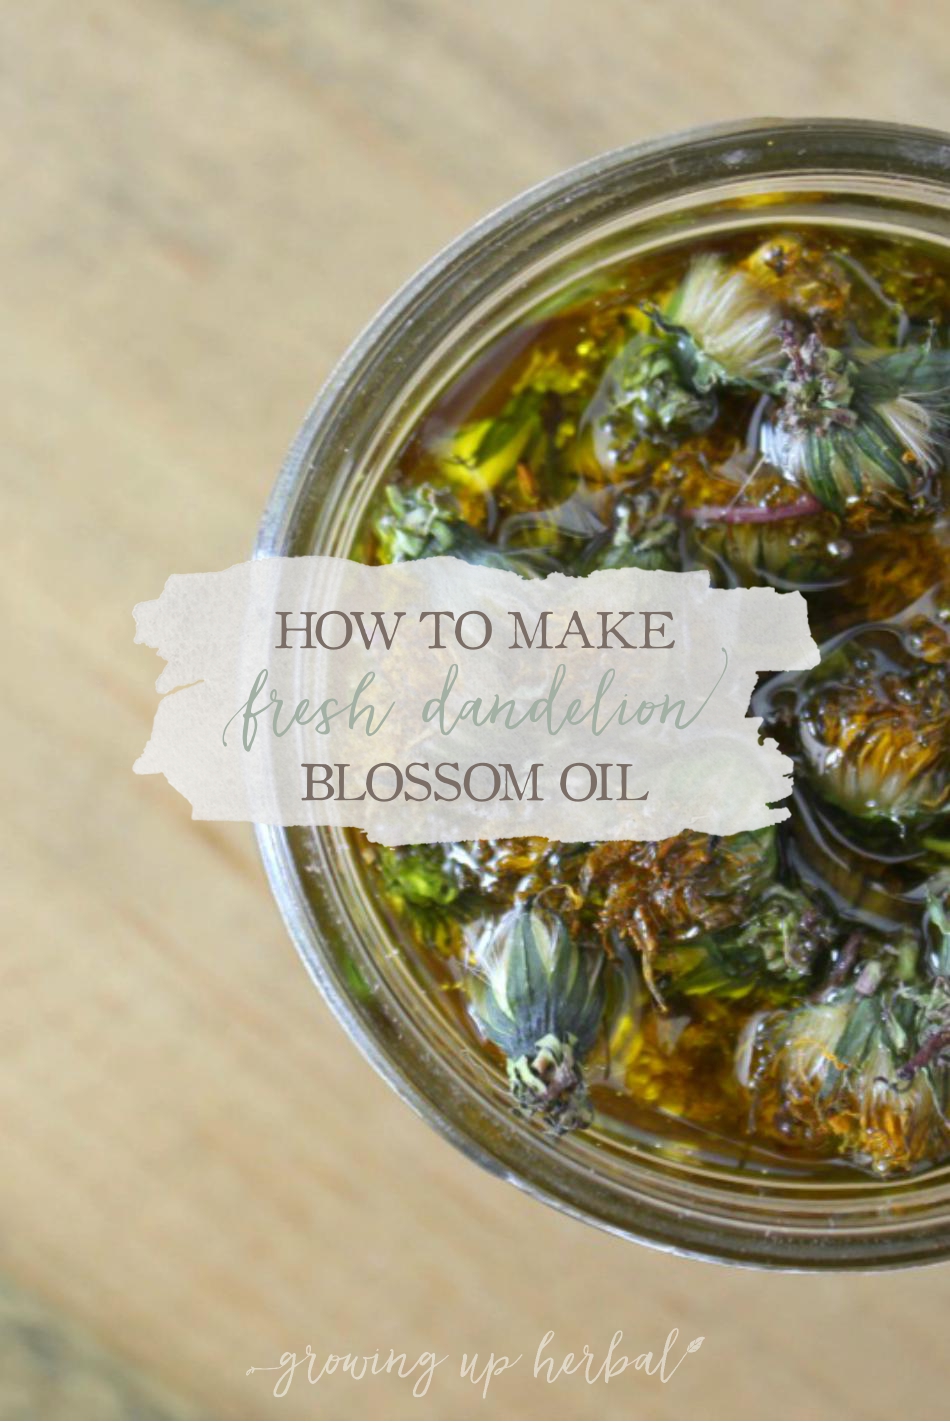 How To Make Fresh Dandelion Blossom Oil | Growing Up Herbal | Learn how to take fresh dandelion flowers and infuse them into an herbal oil.